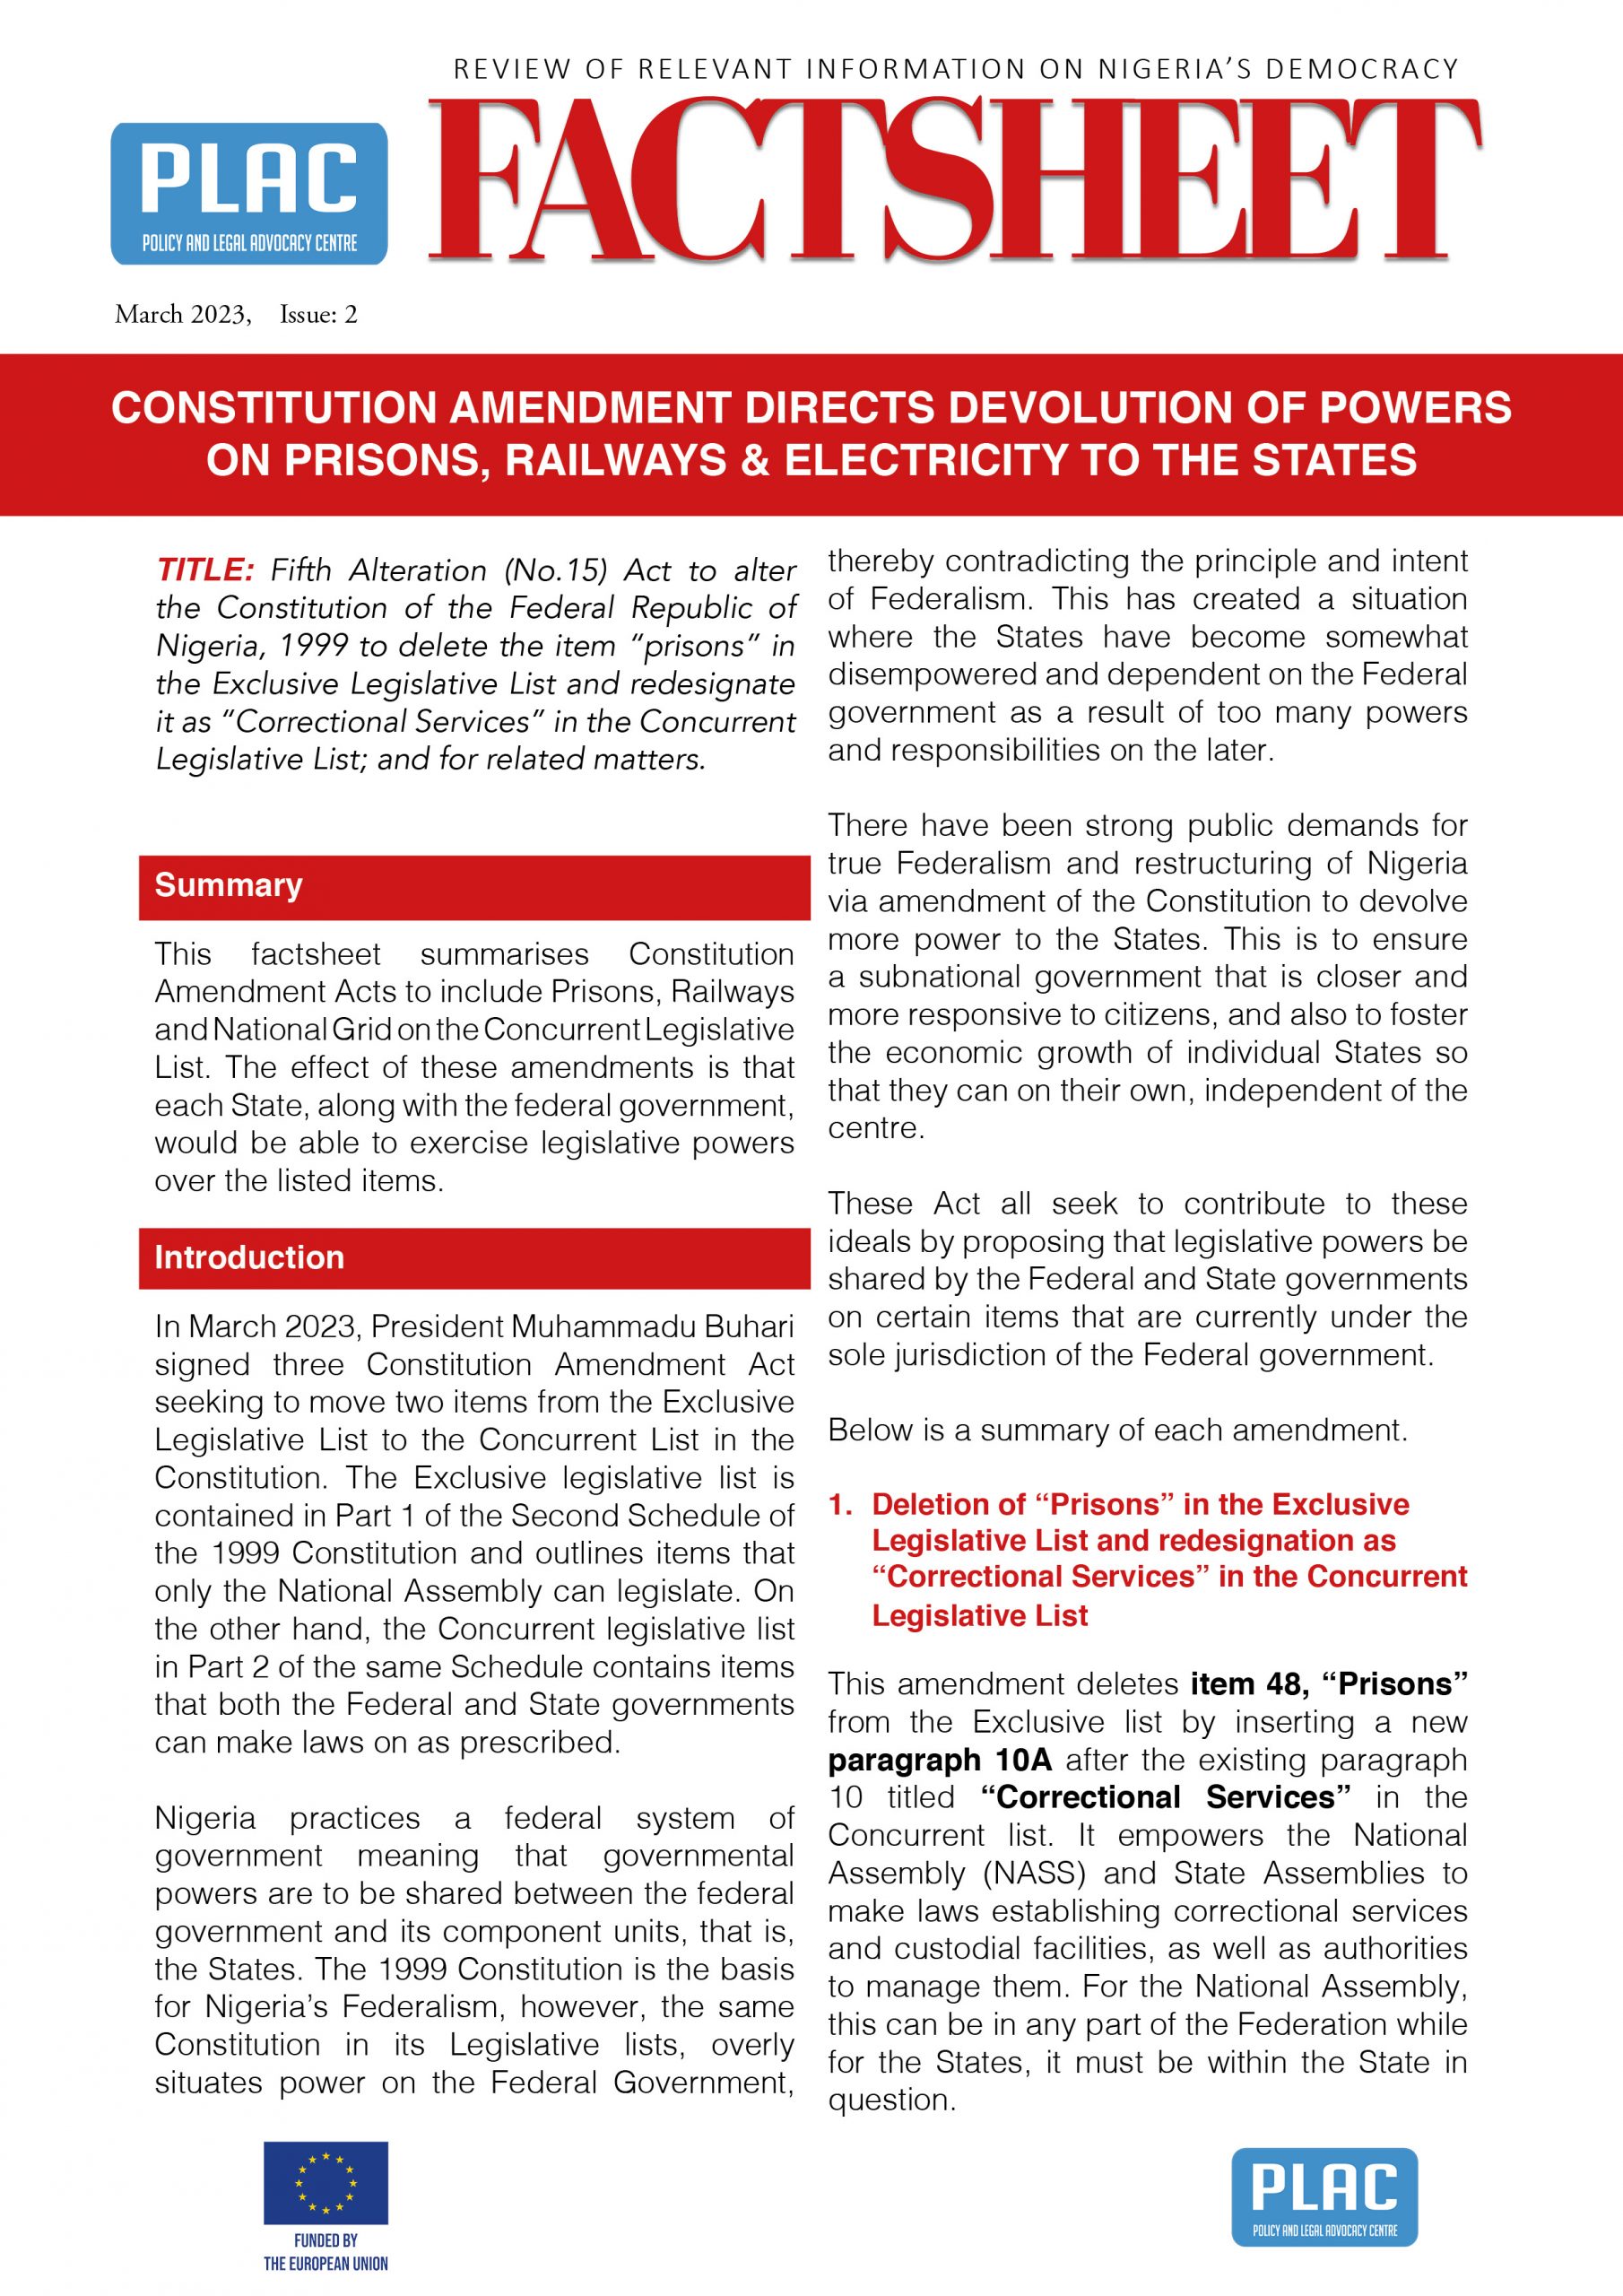 Constitution Amendment Directs Devolution of Powers on Prisons, Railways & Electricity to the States